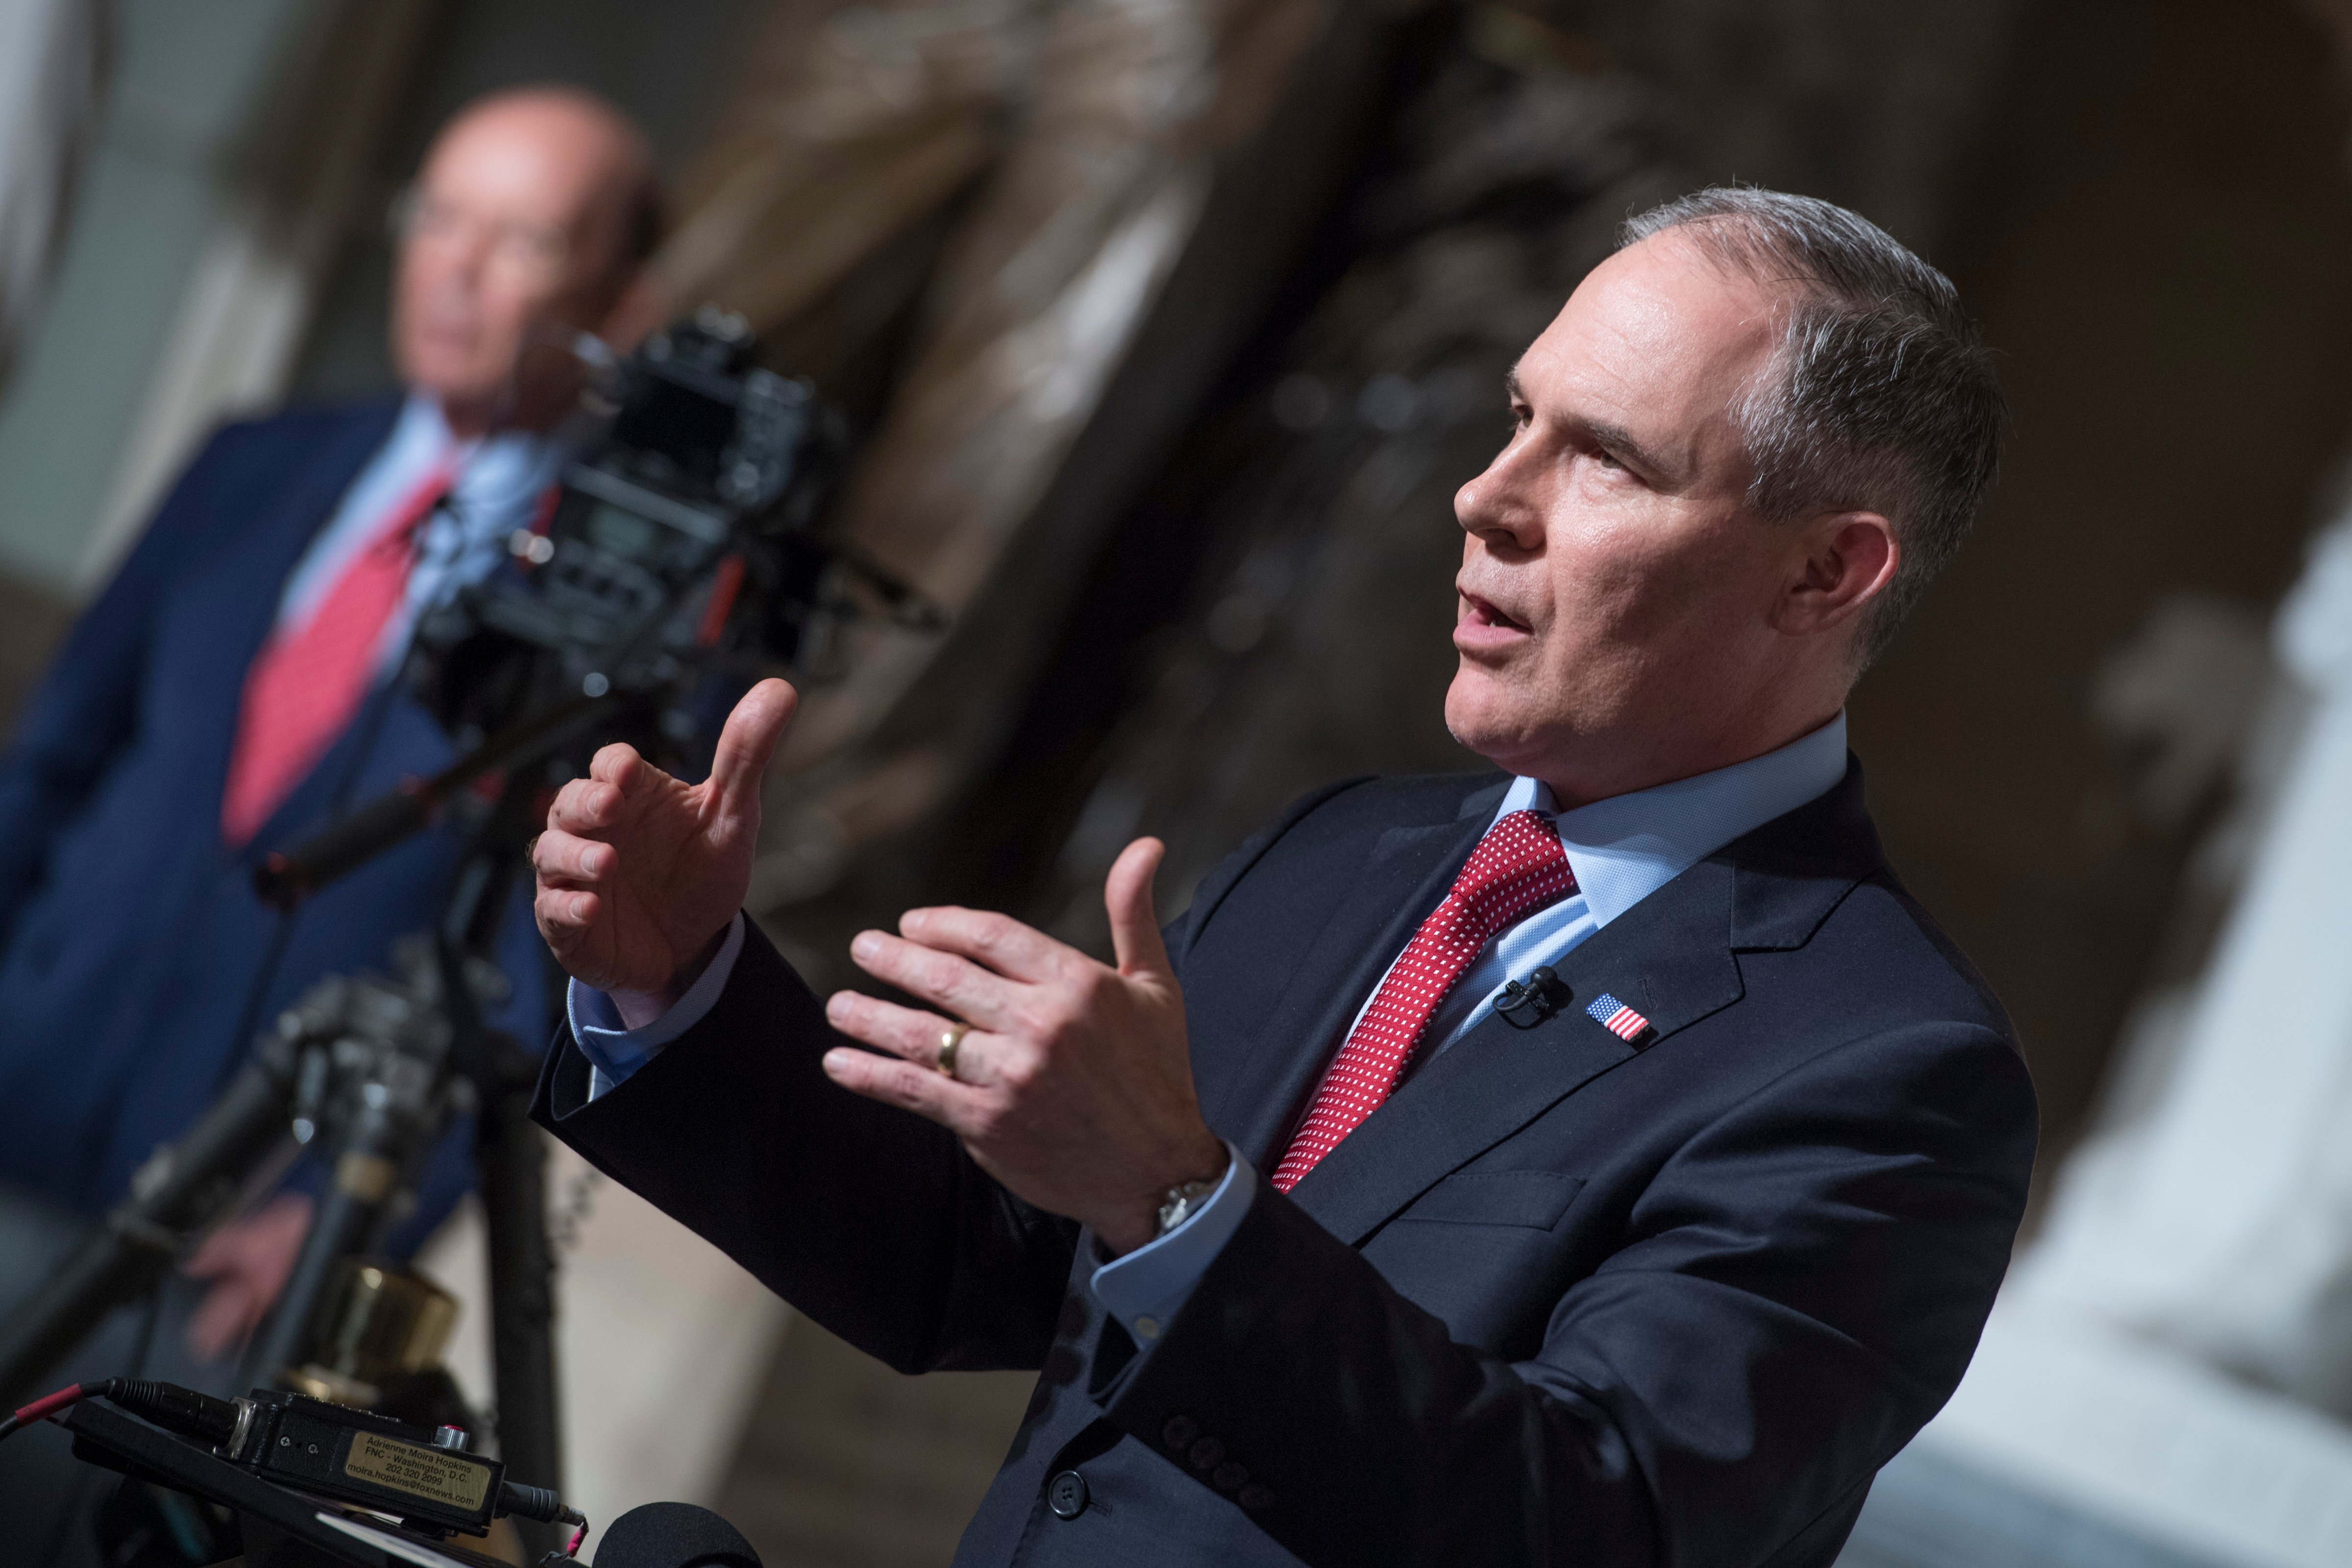 Scott Pruitt, administrator of the Environmental Protection Agency, is interviewed in Statuary Hall before President Donald Trump addressed a joint session of Congress on Feb 28 (Tom Williams—CQ-Roll Call)